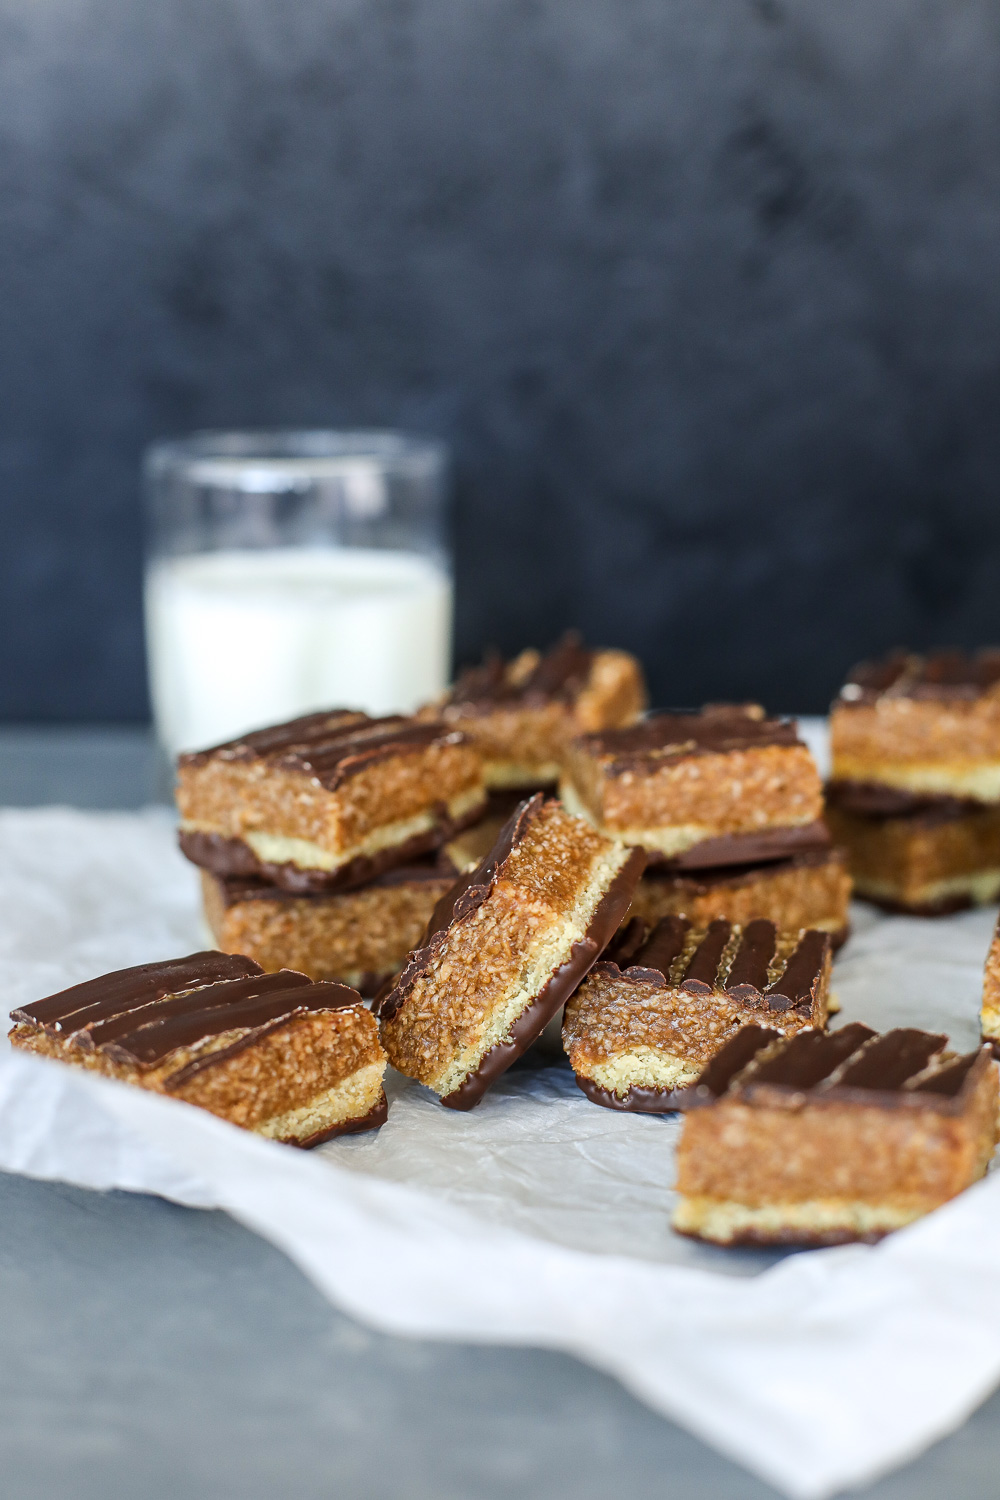 These Healthier Samoa Bars are SO delicious, easy to make and are also dairy free, grain free, gluten free and refined sugar free!